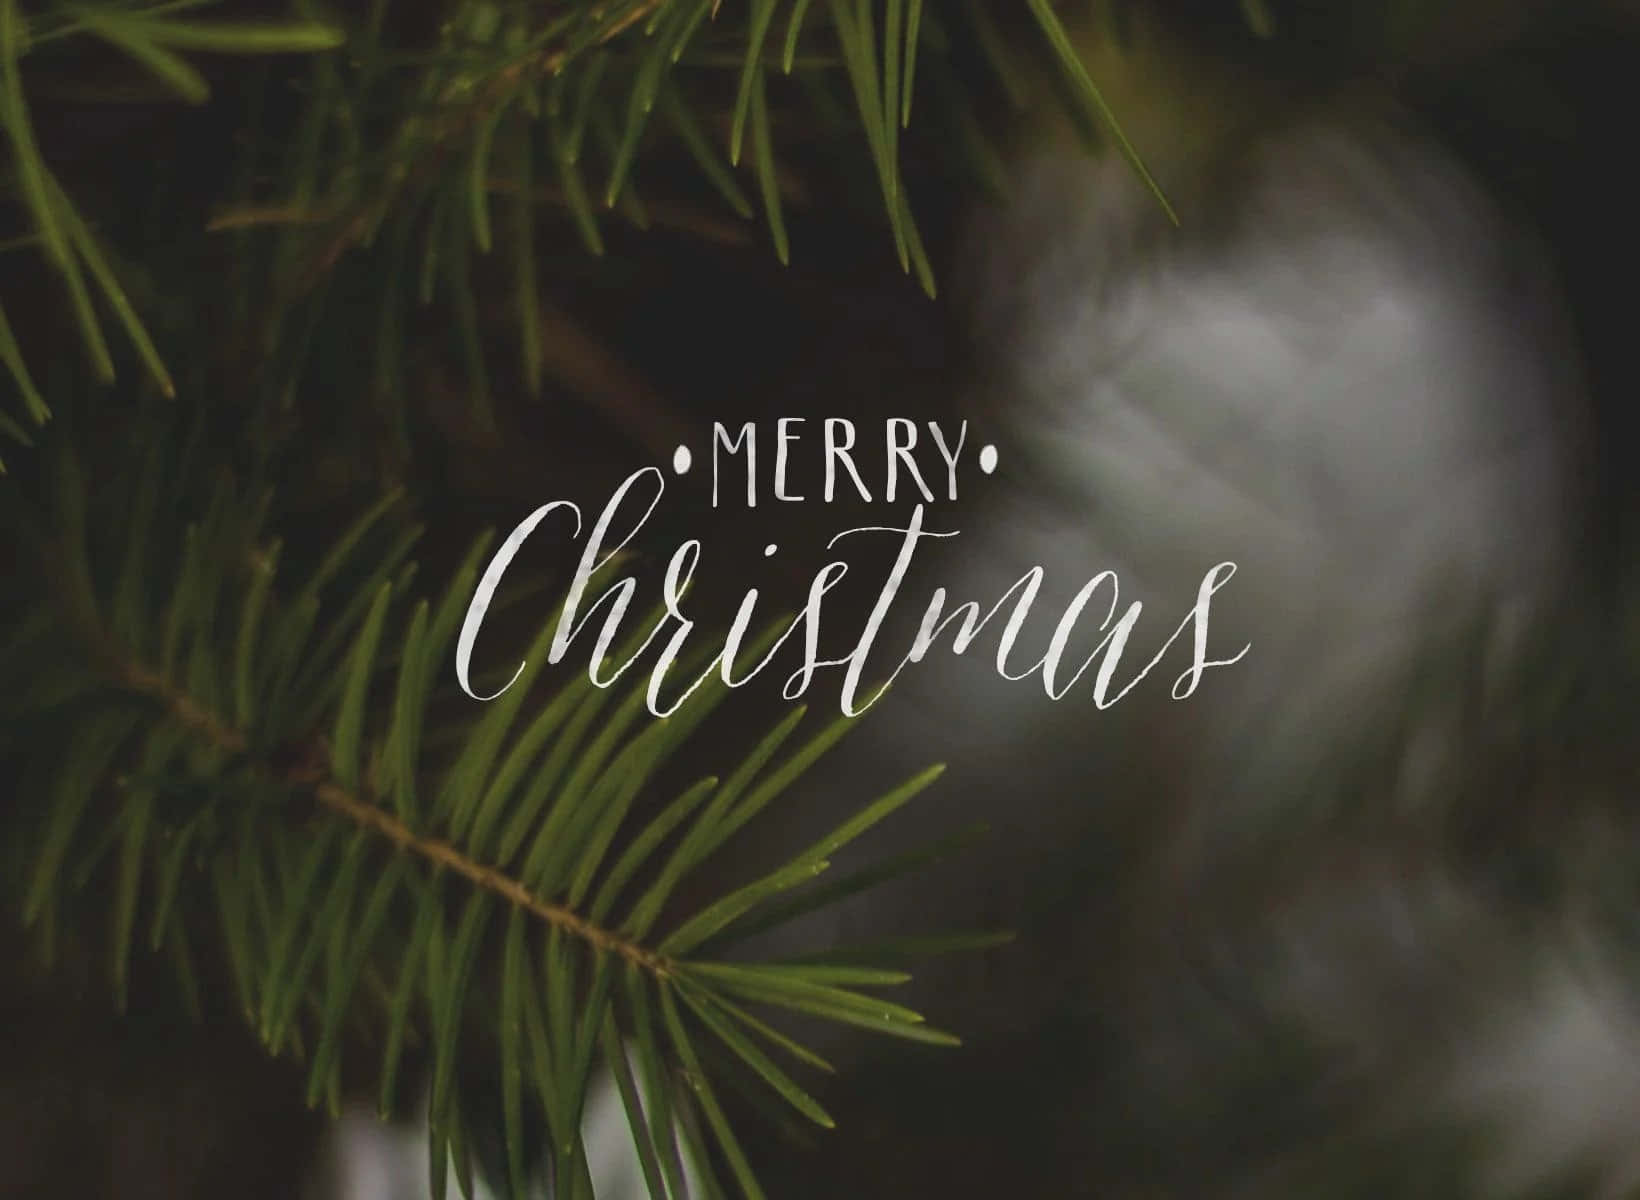 Wishing you a Merry Christmas and a happy New Year!